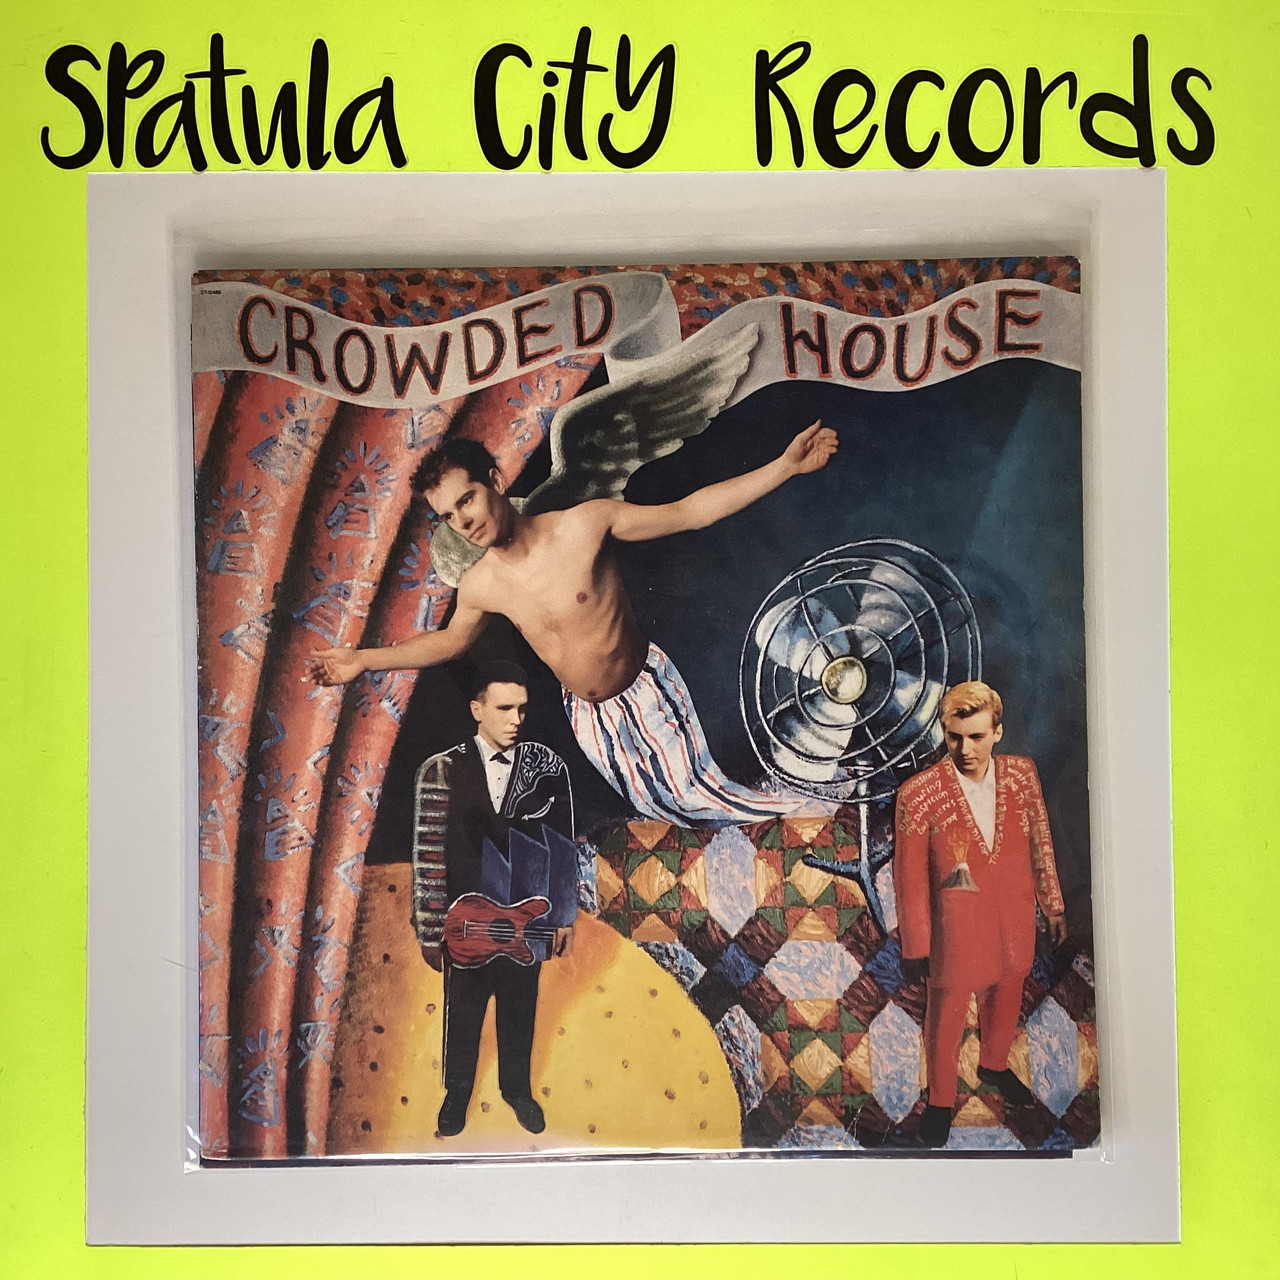 Crowded House - self-titled - vinyl record album LP